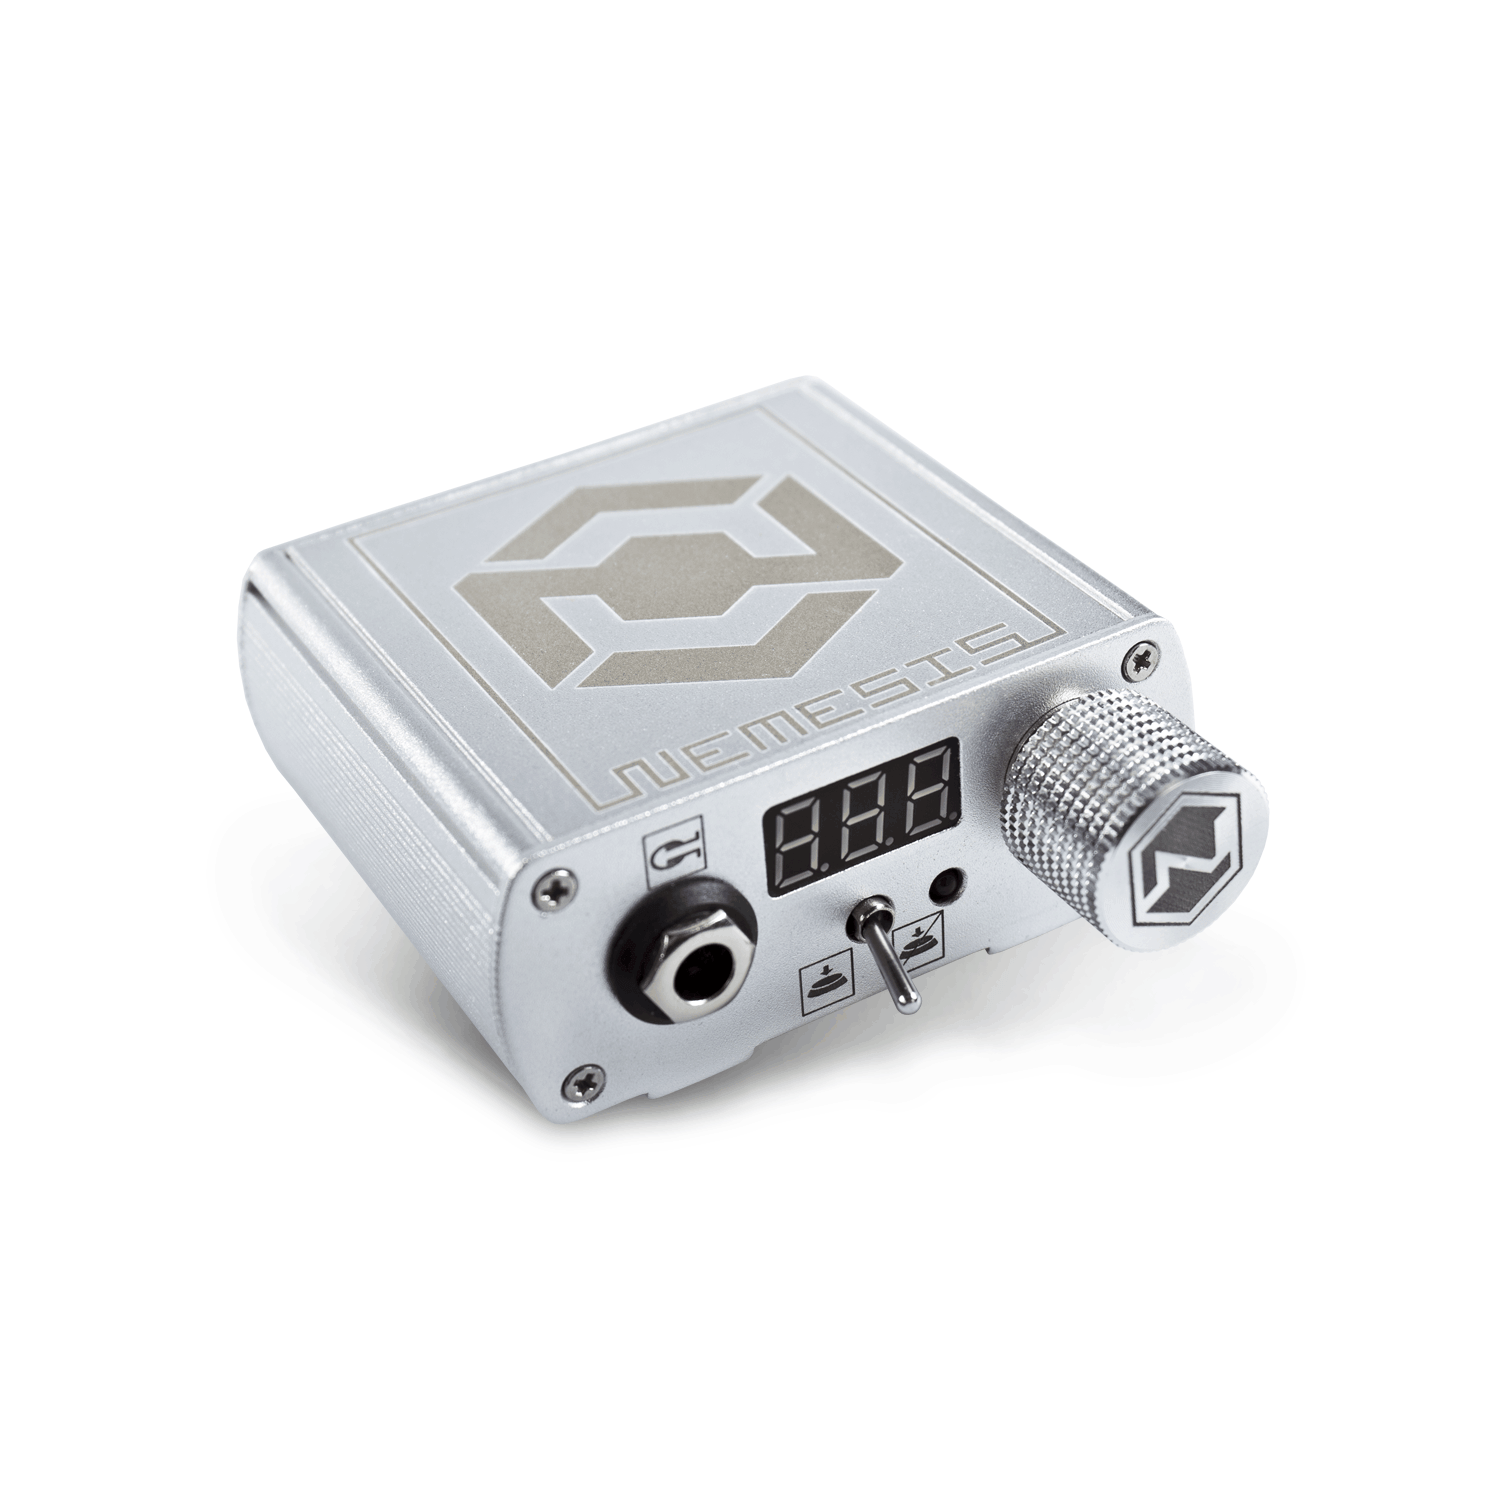 Nemesis Professional Tattoo Power Supply in Silver by Kwadron Silver